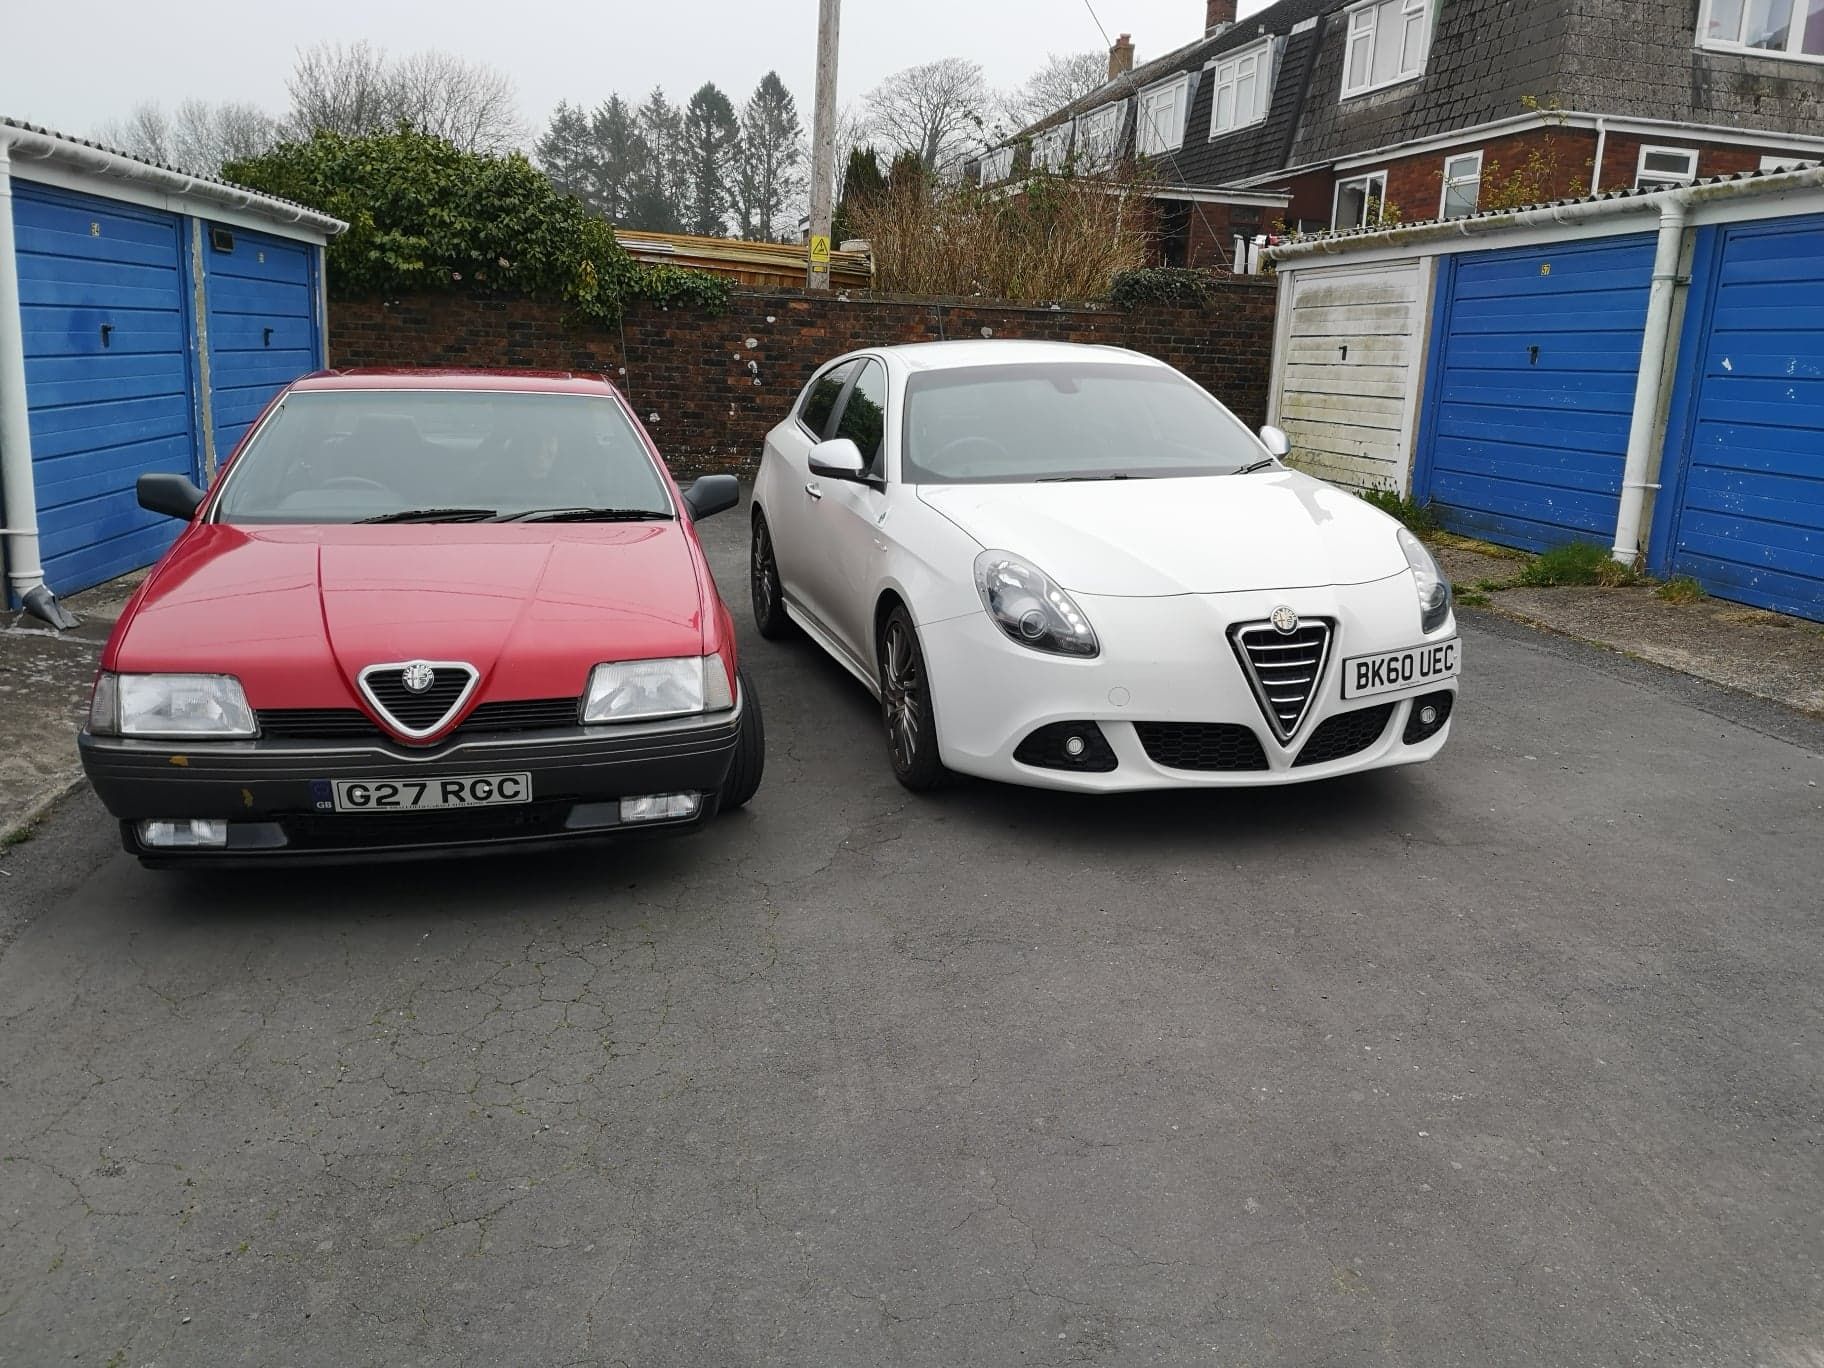 Sammy Moon's Alfa Collection in 2019